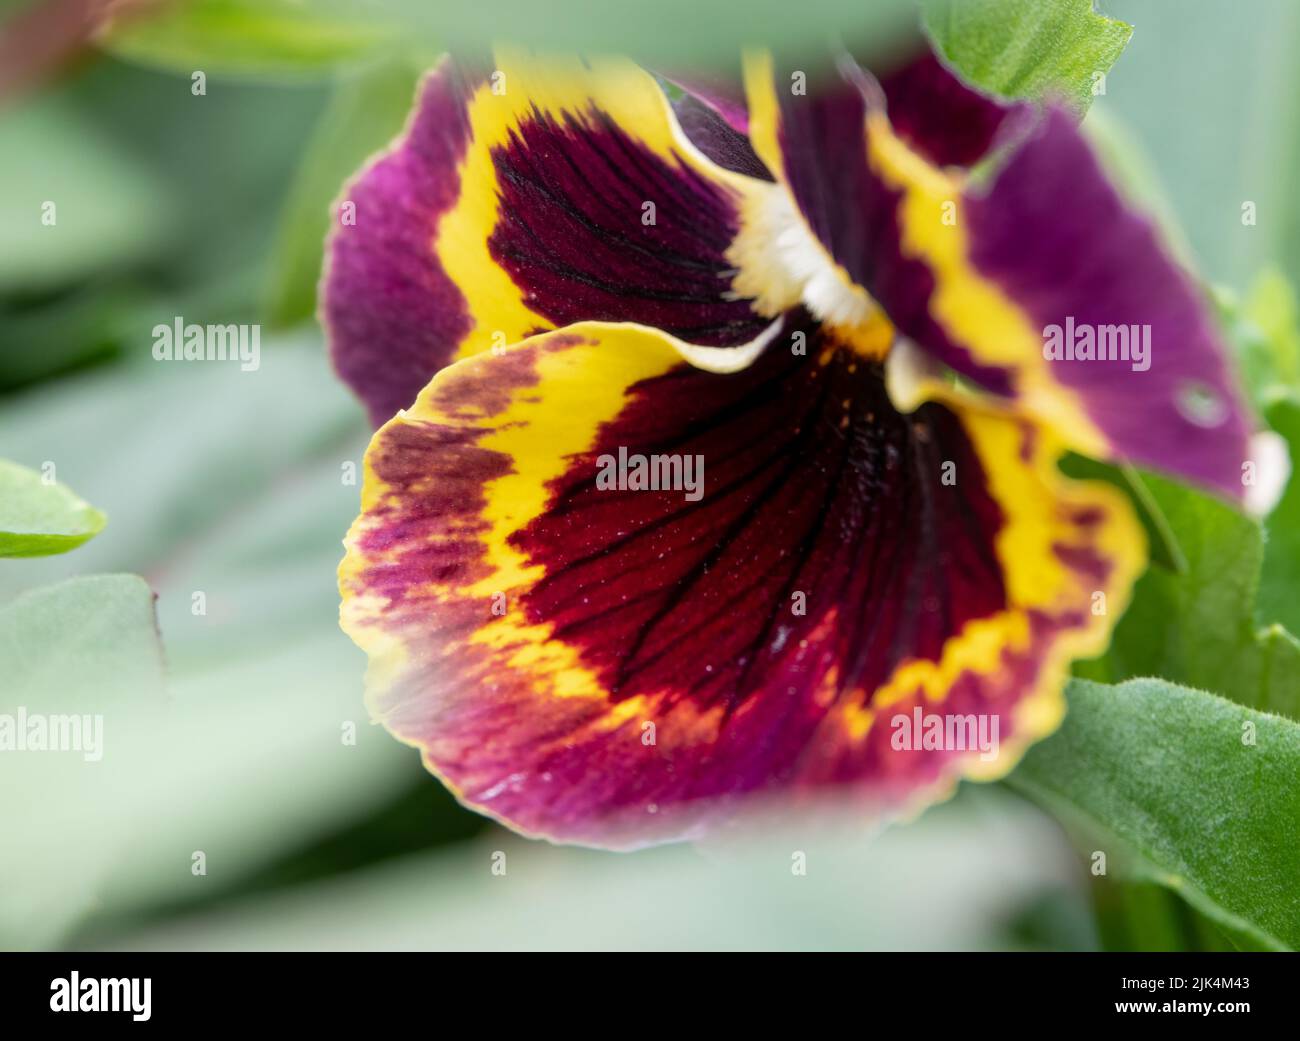 close up of beautiful summer flowering violet and yellow Pansies (Viola tricolor var. hortensis) Stock Photo